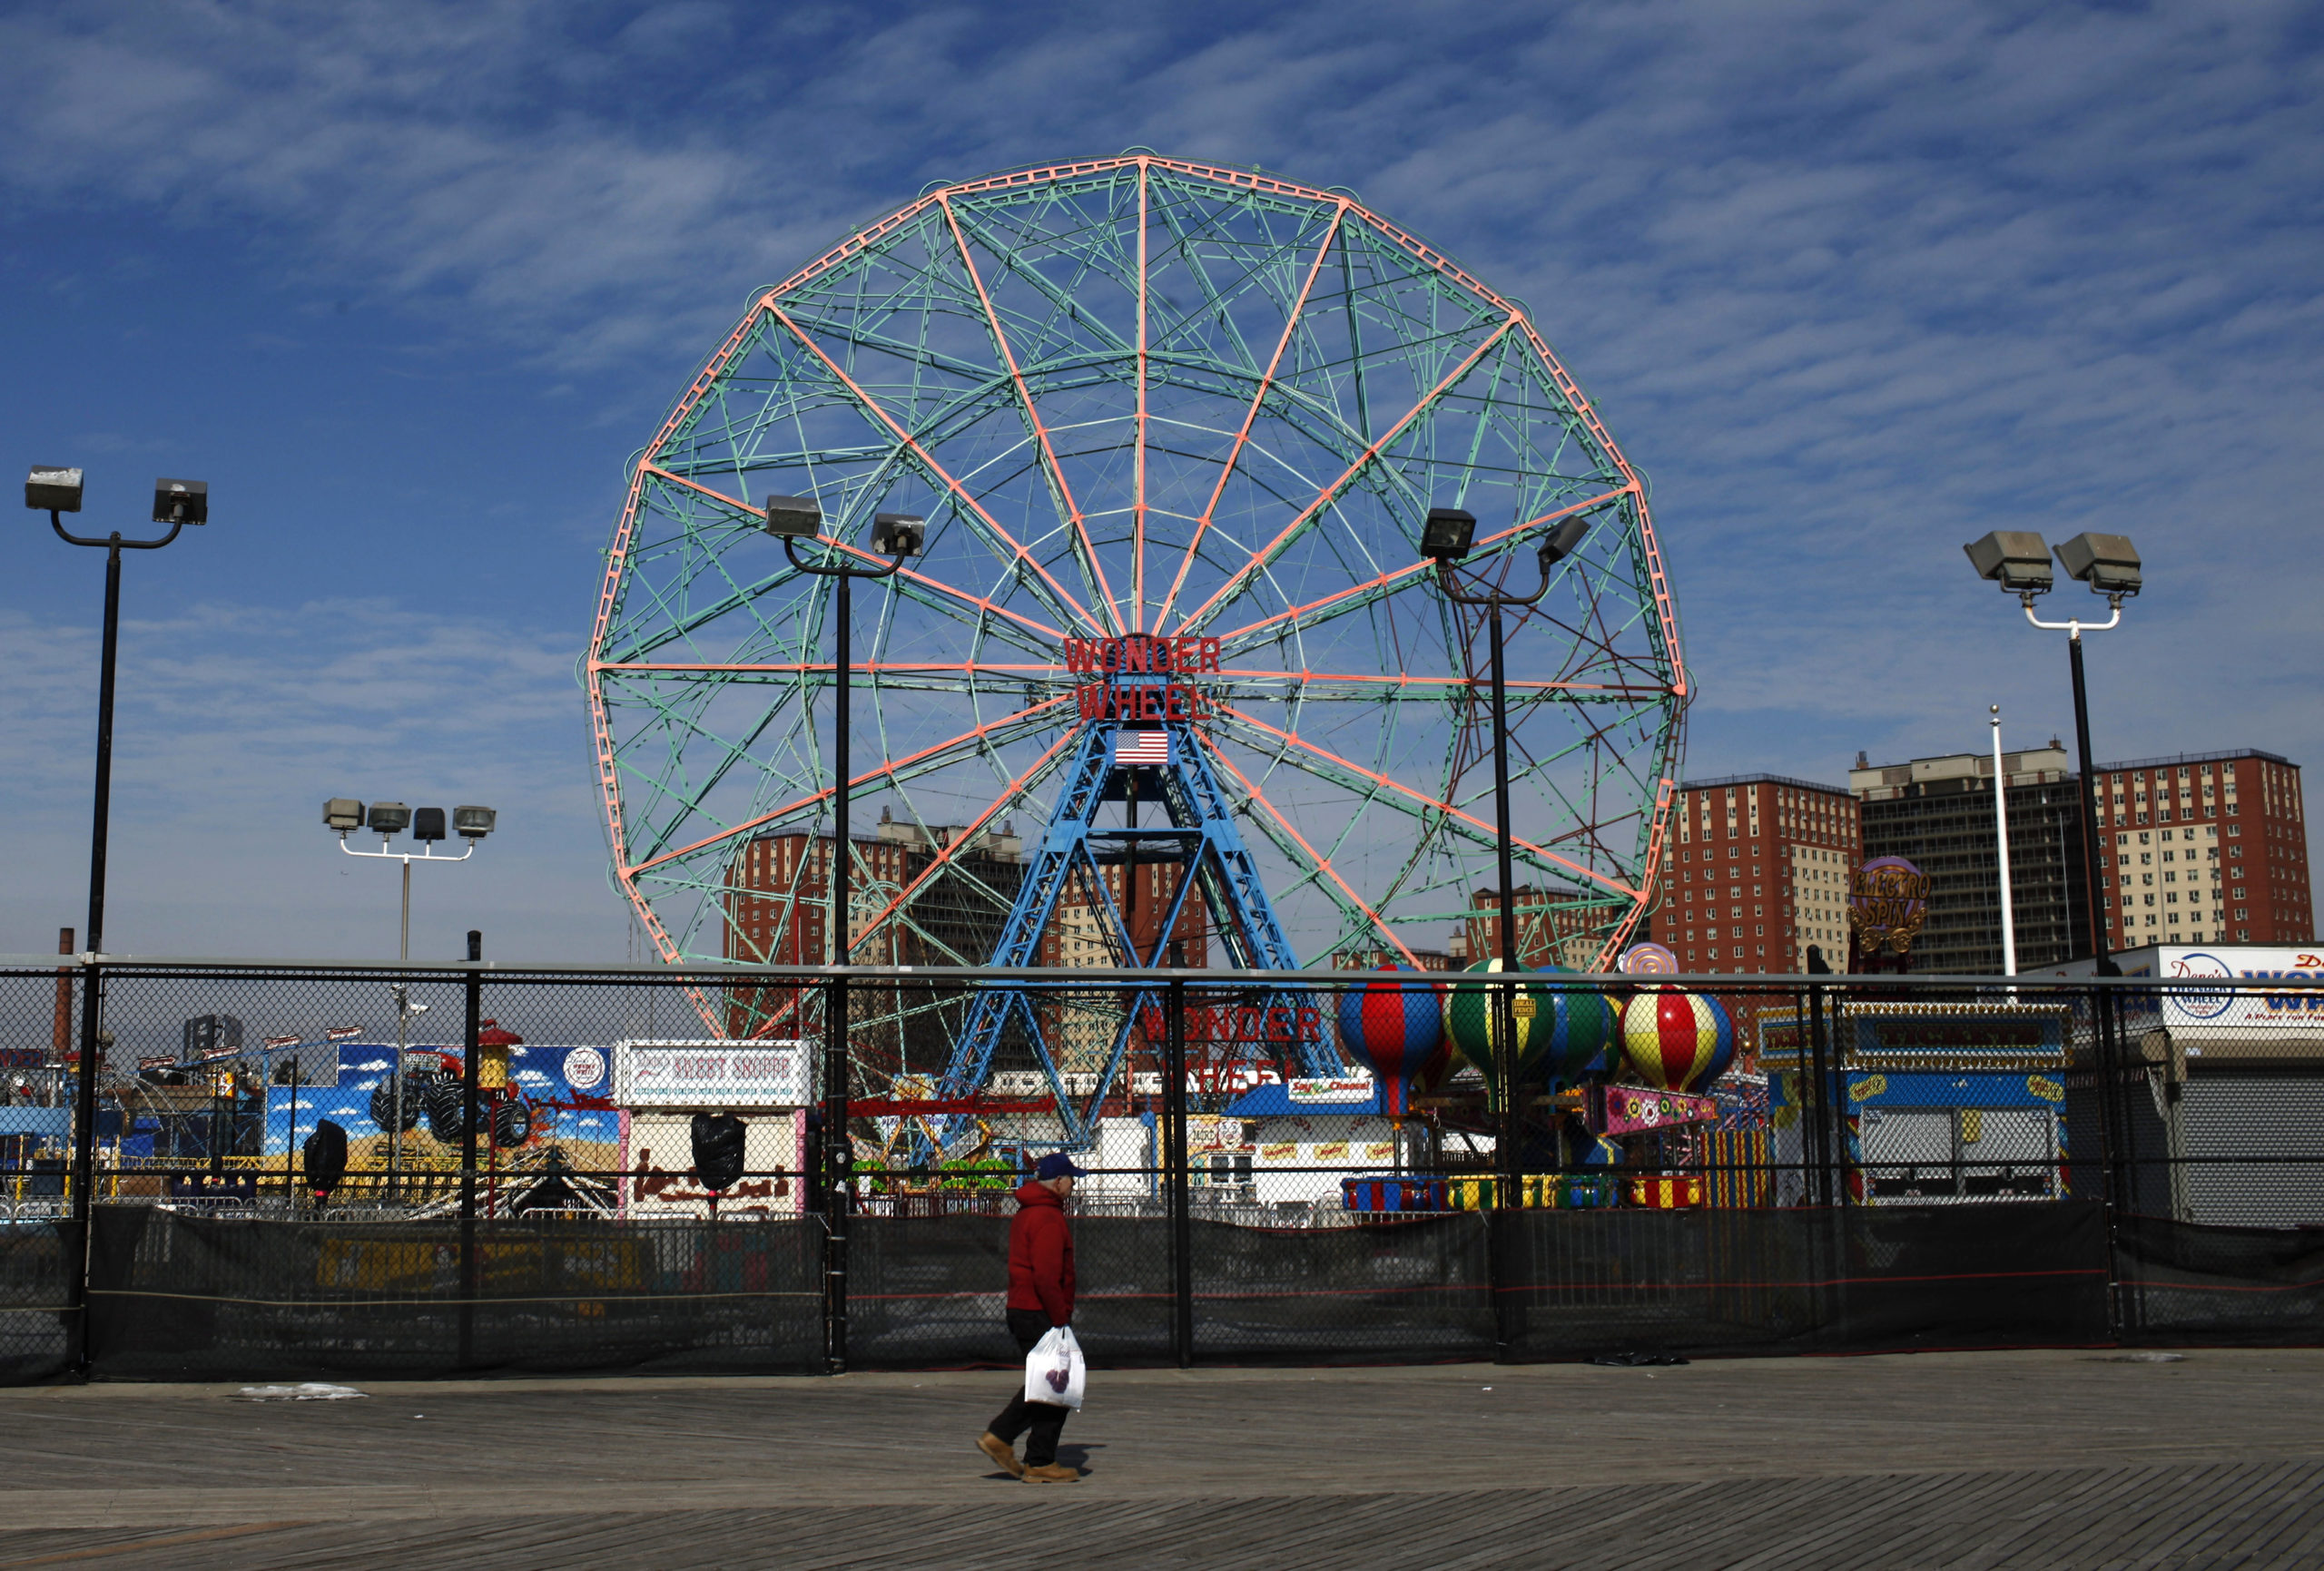 A man walks past the Wonder Wheel ride and an amusement part on the seaside Coney Island Boardwalk in the Brooklyn Borough of New York City February 26, 2015. Three men were charged on Wednesday with conspiring to support Islamic State, including two who planned to travel to Syria to fight on behalf of the radical group, U.S. authorities said. The suspects, all of three of whom lived in Brooklyn, were identified as Akhror Saidakhmetov, 19, a Kazakh national, Abdurasul Hasanovich Juraboev, 24 and Abror Habibov, 30, both from Uzbekistan. Police allege the suspects discussed carrying out attacks in the US, including shooting police officers and planting a bomb on New York's Coney Island seaside resort. REUTERS/Mike Segar (UNITED STATES - Tags: CITYSCAPE CIVIL UNREST CRIME LAW)